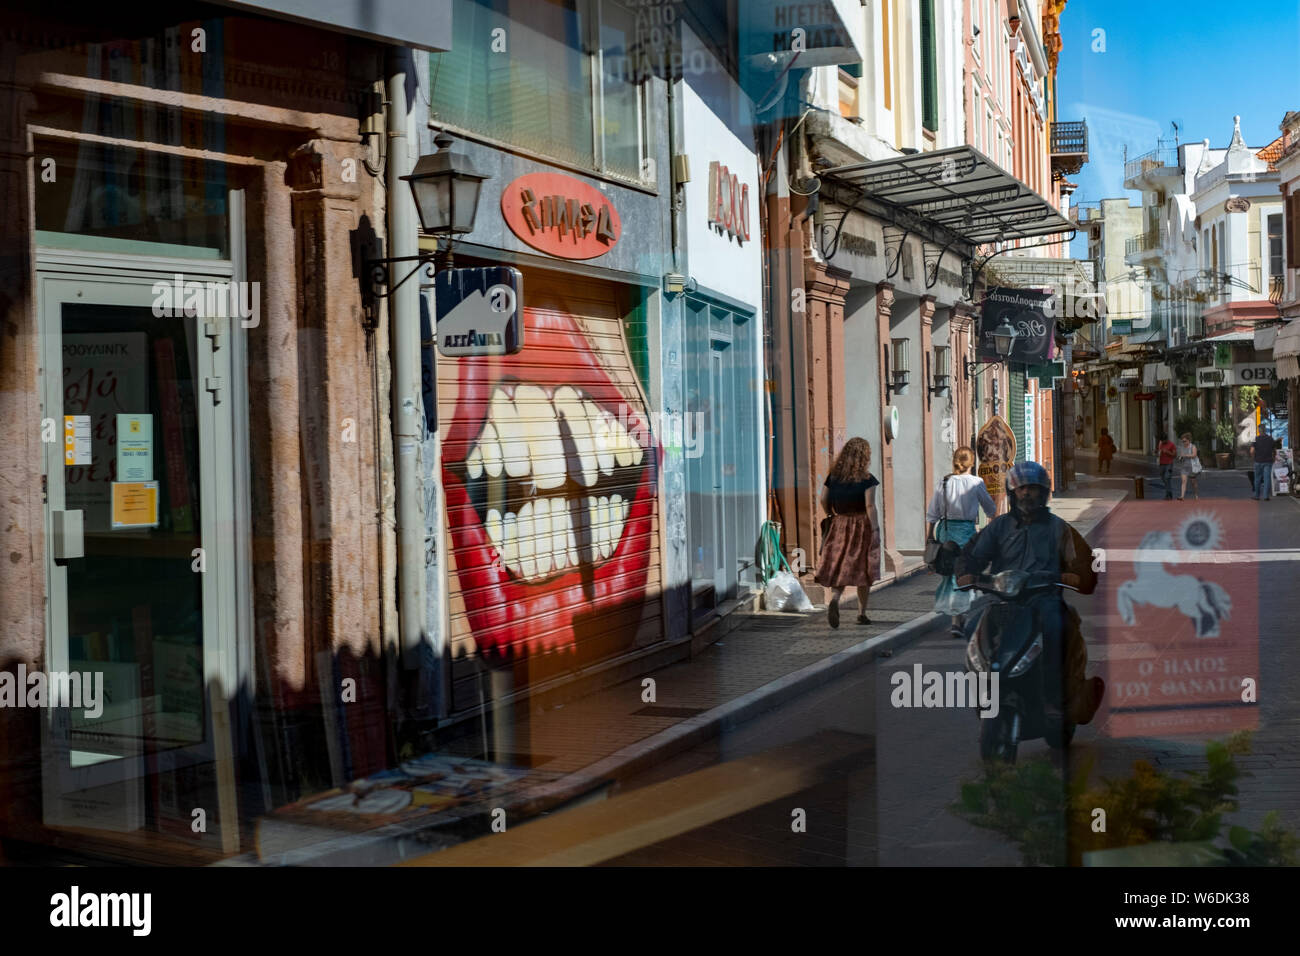 Street scene on the main commercial street of the town of Mytilene on the Greek island of Lesvos during the late afternoon. Stock Photo